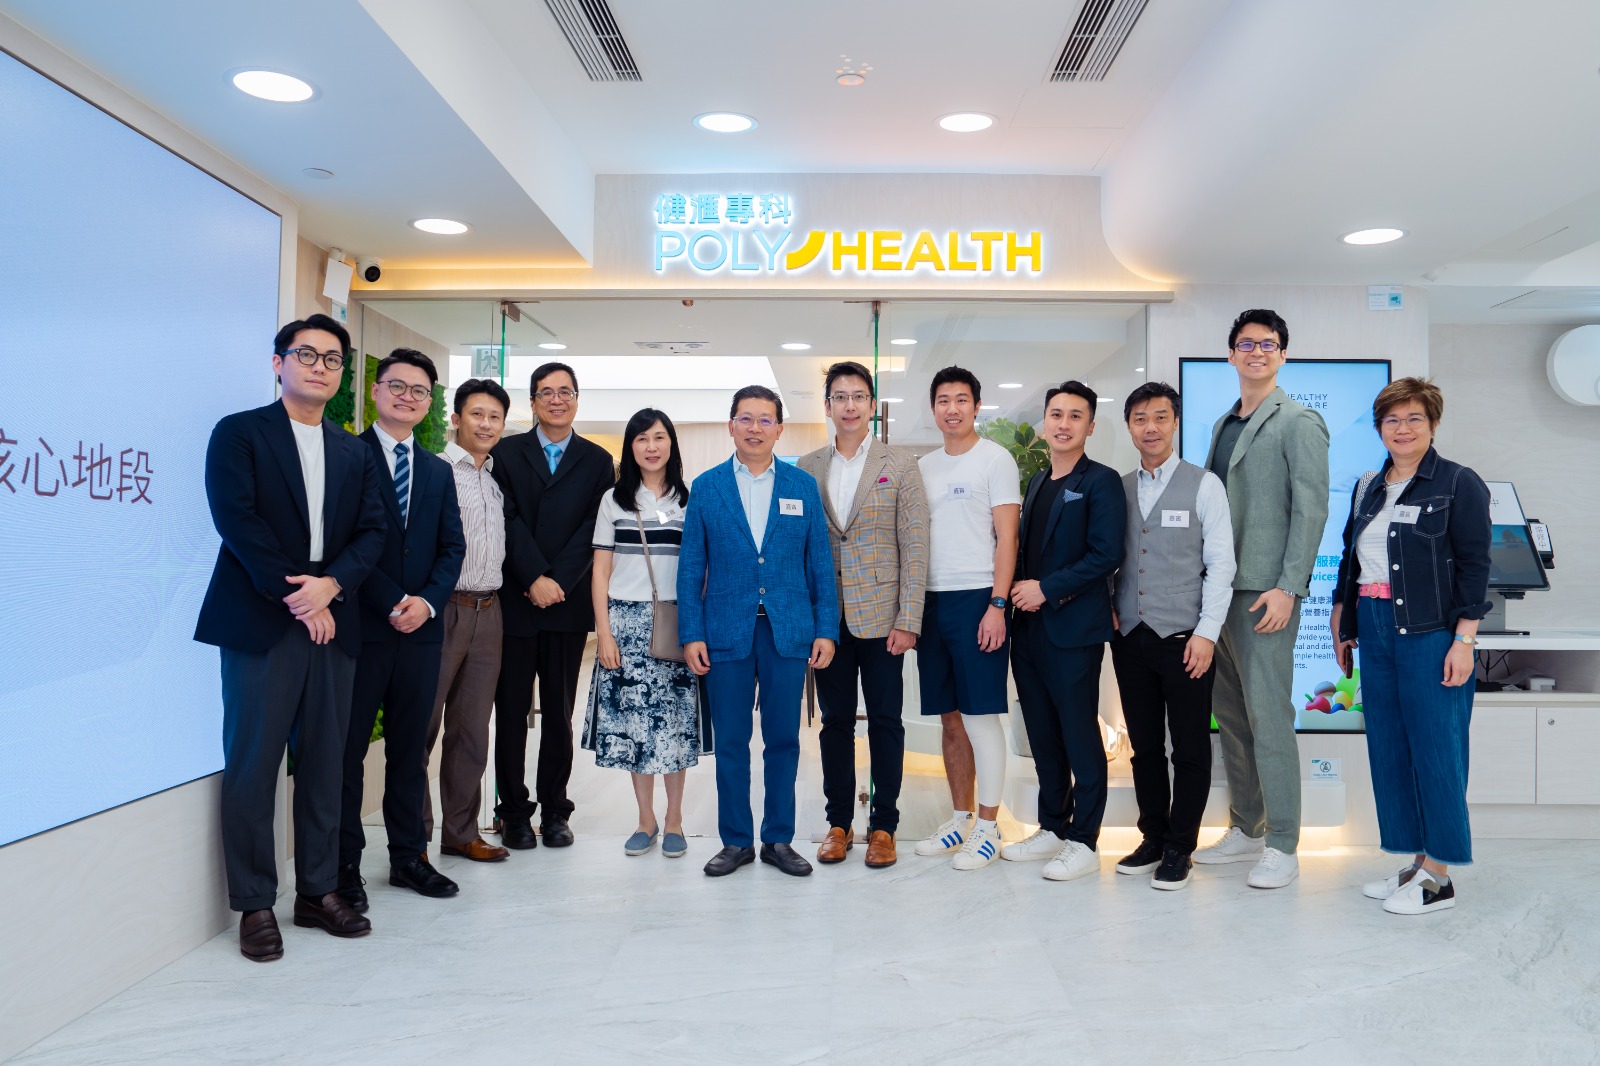 Mr. Chan Kin Ping, BBS, JP, Chairman and Chief Executive Officer of Human Health (from left, 6th) and Vincent Tsang, co-founder and Chief Executive Officer of BioMed (from right, 3rd) joined hands to promote gut microbiome health management at community level.